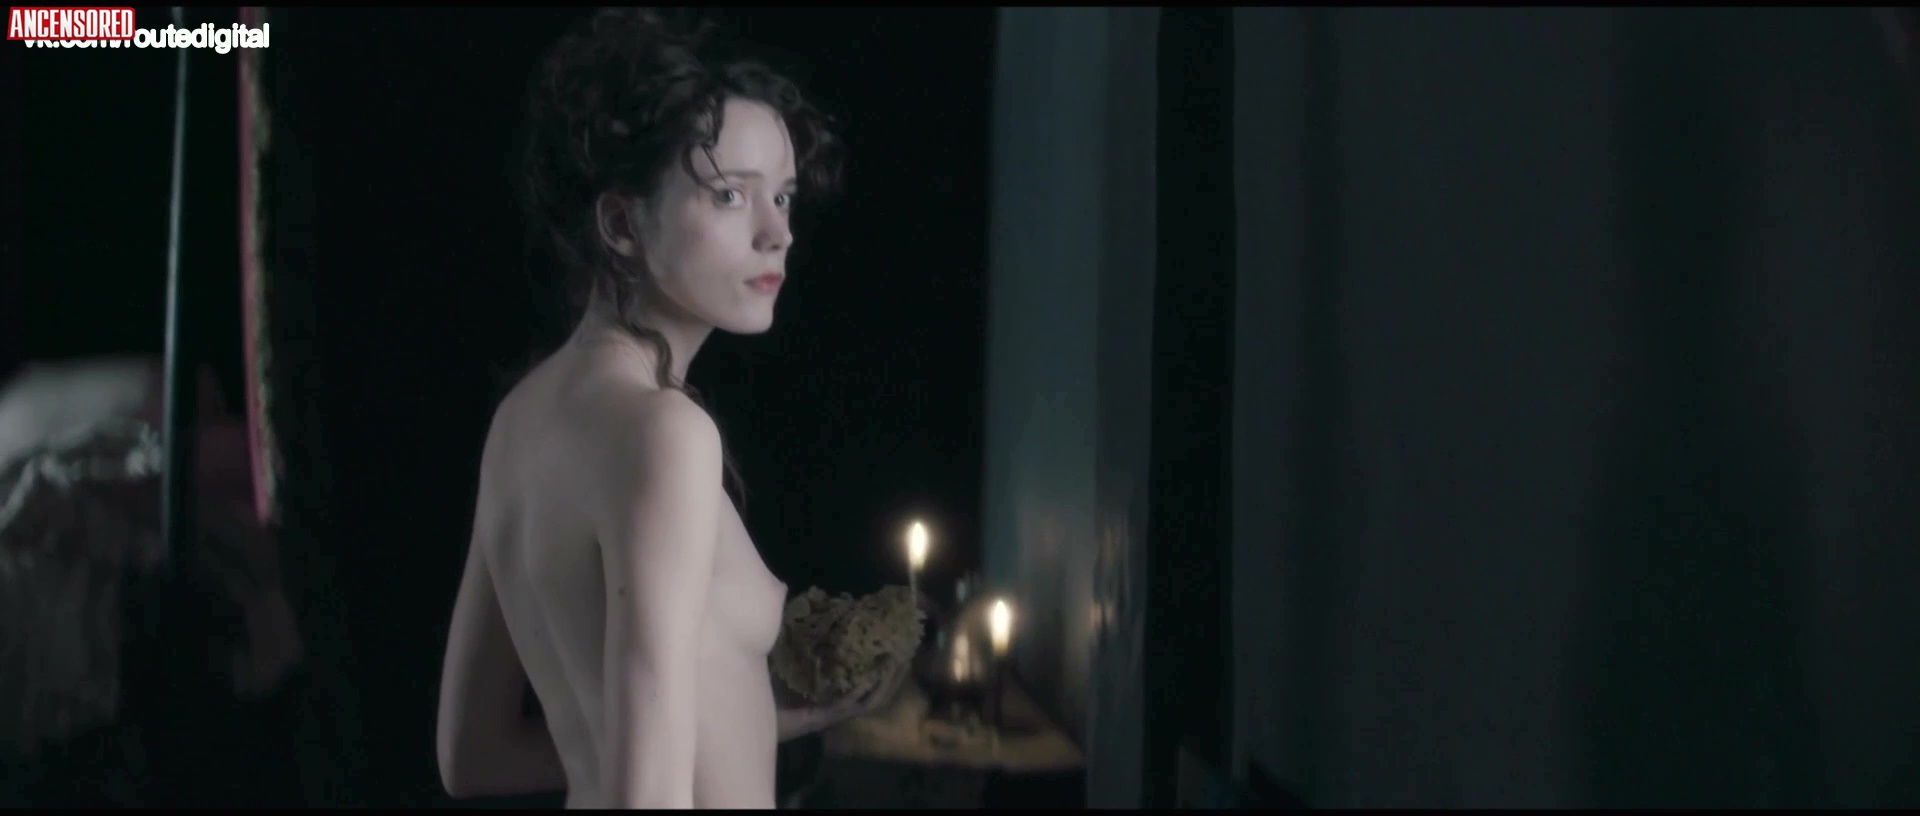 Stacy Martin nude pics.